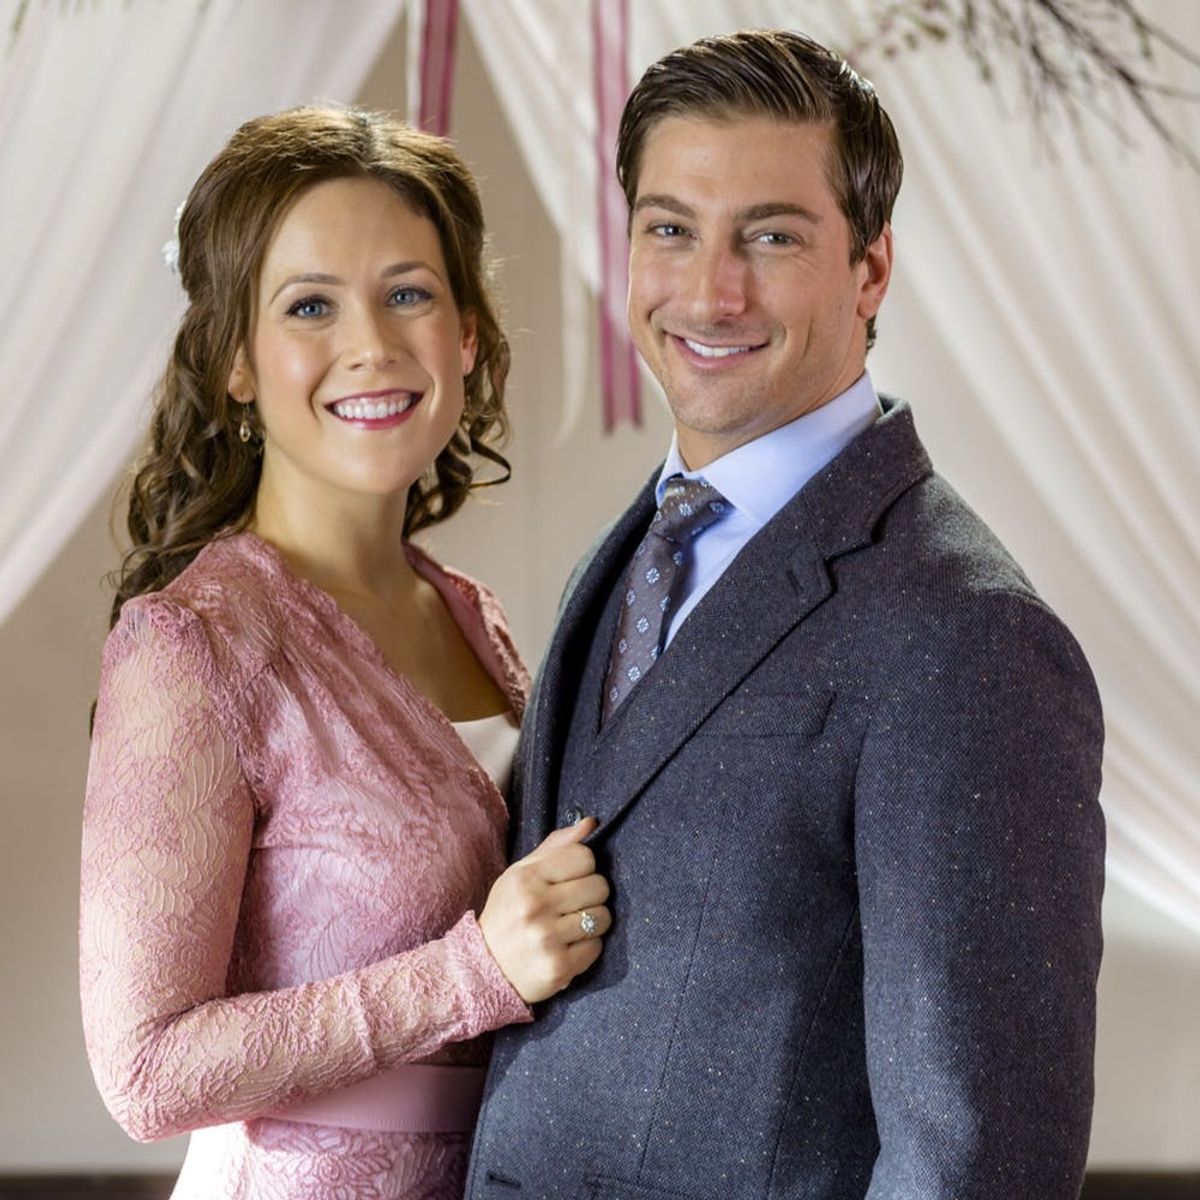 ‘When Calls the Heart’ Star Daniel Lissing Says Goodbye to the Show in an Emotional Post